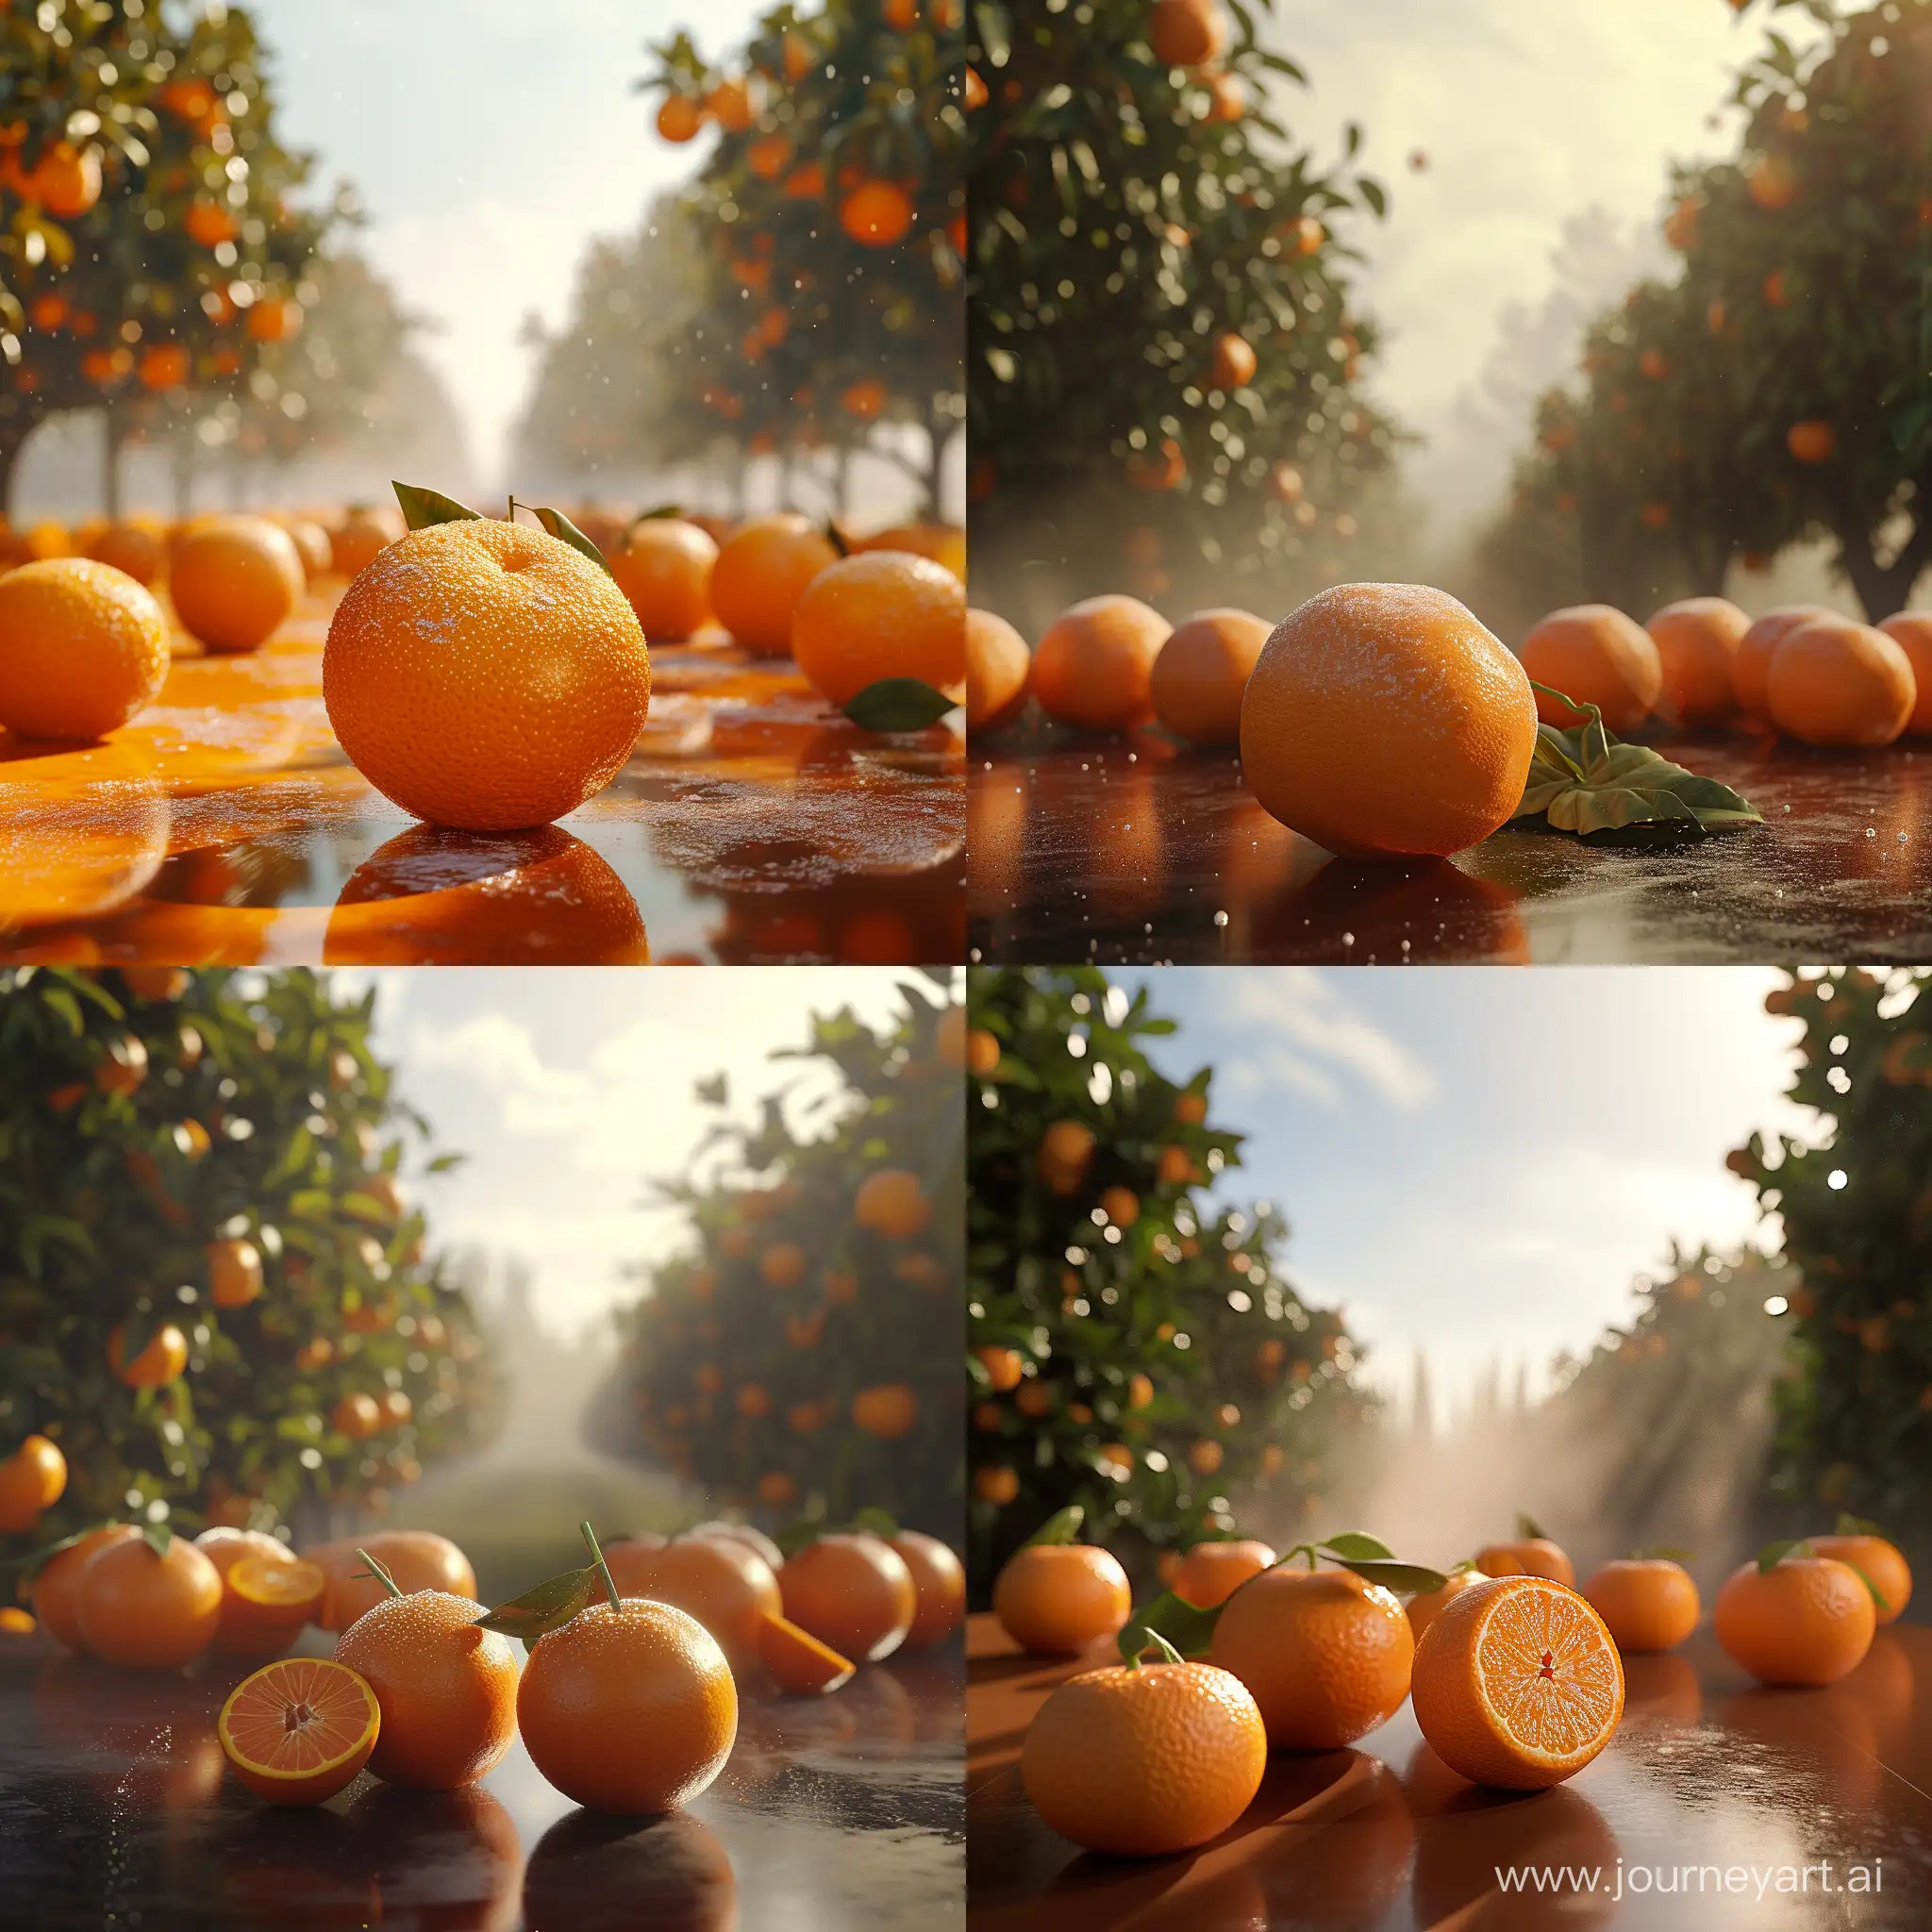 Vibrant-Orange-Product-Display-with-Lush-Orchard-Background